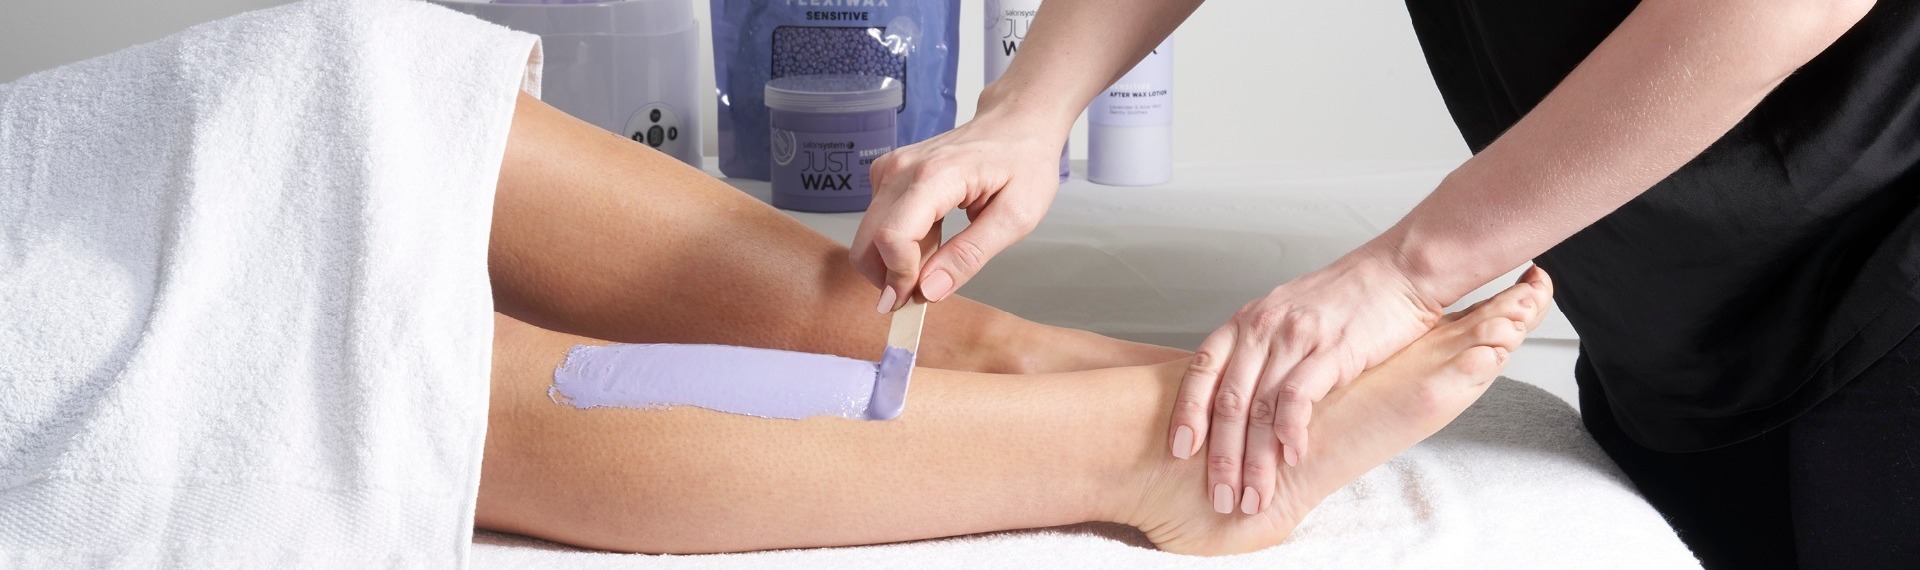 Waxing courses for beginners in London, Bristol, Sussex, Yorkshire, Lancashire,